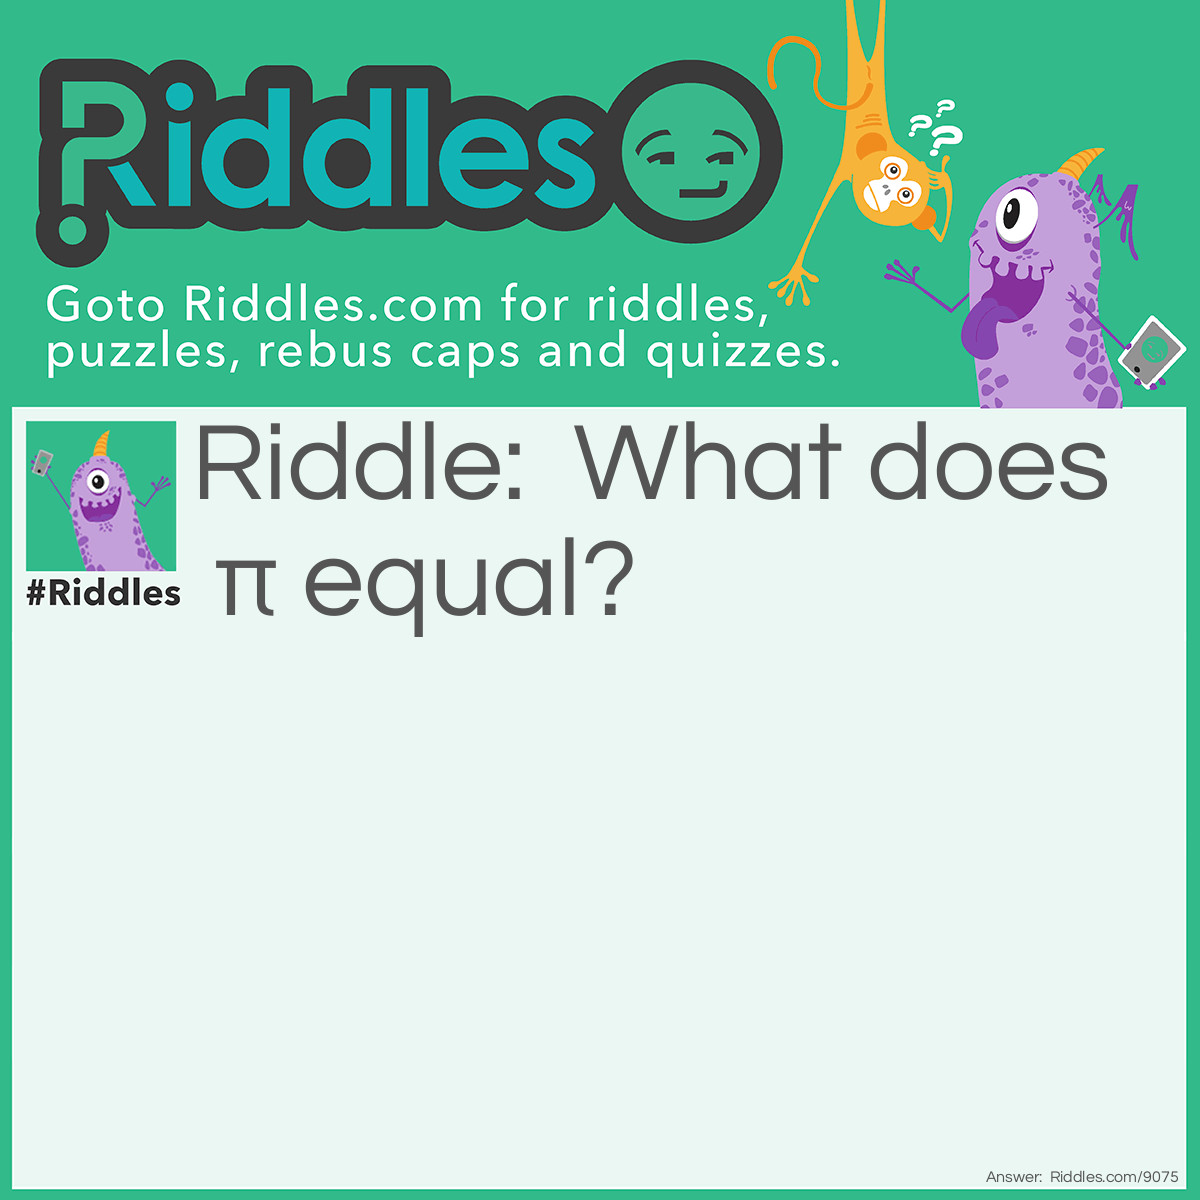 Riddle: What does π equal? Answer: I don't know, but it's sure to be a piece of "pie" to work it out (a piece of cake).